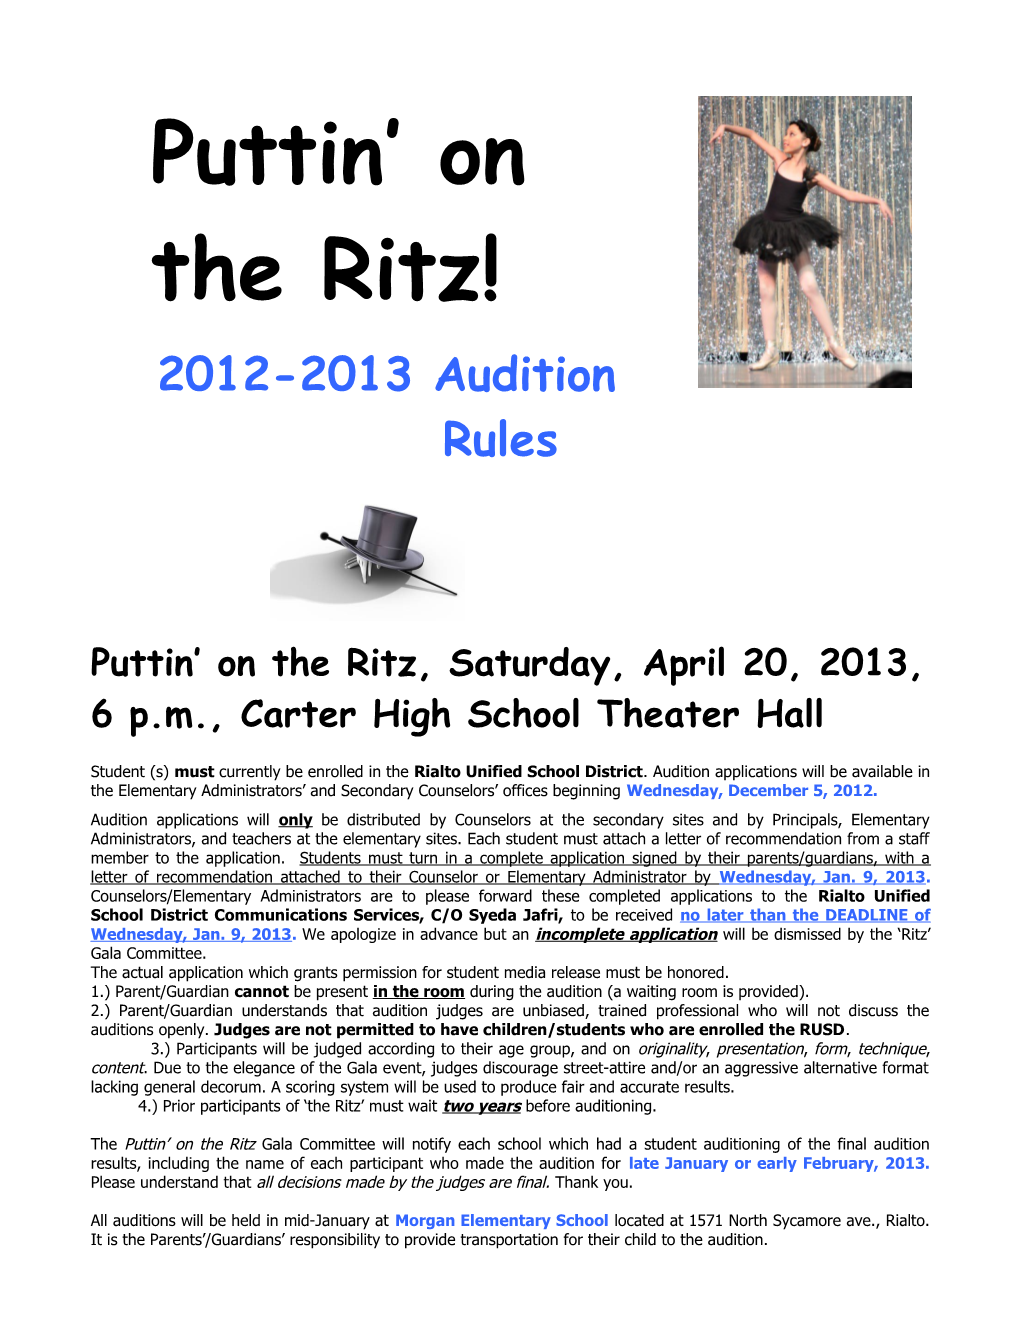 Preliminary Rules for Auditions